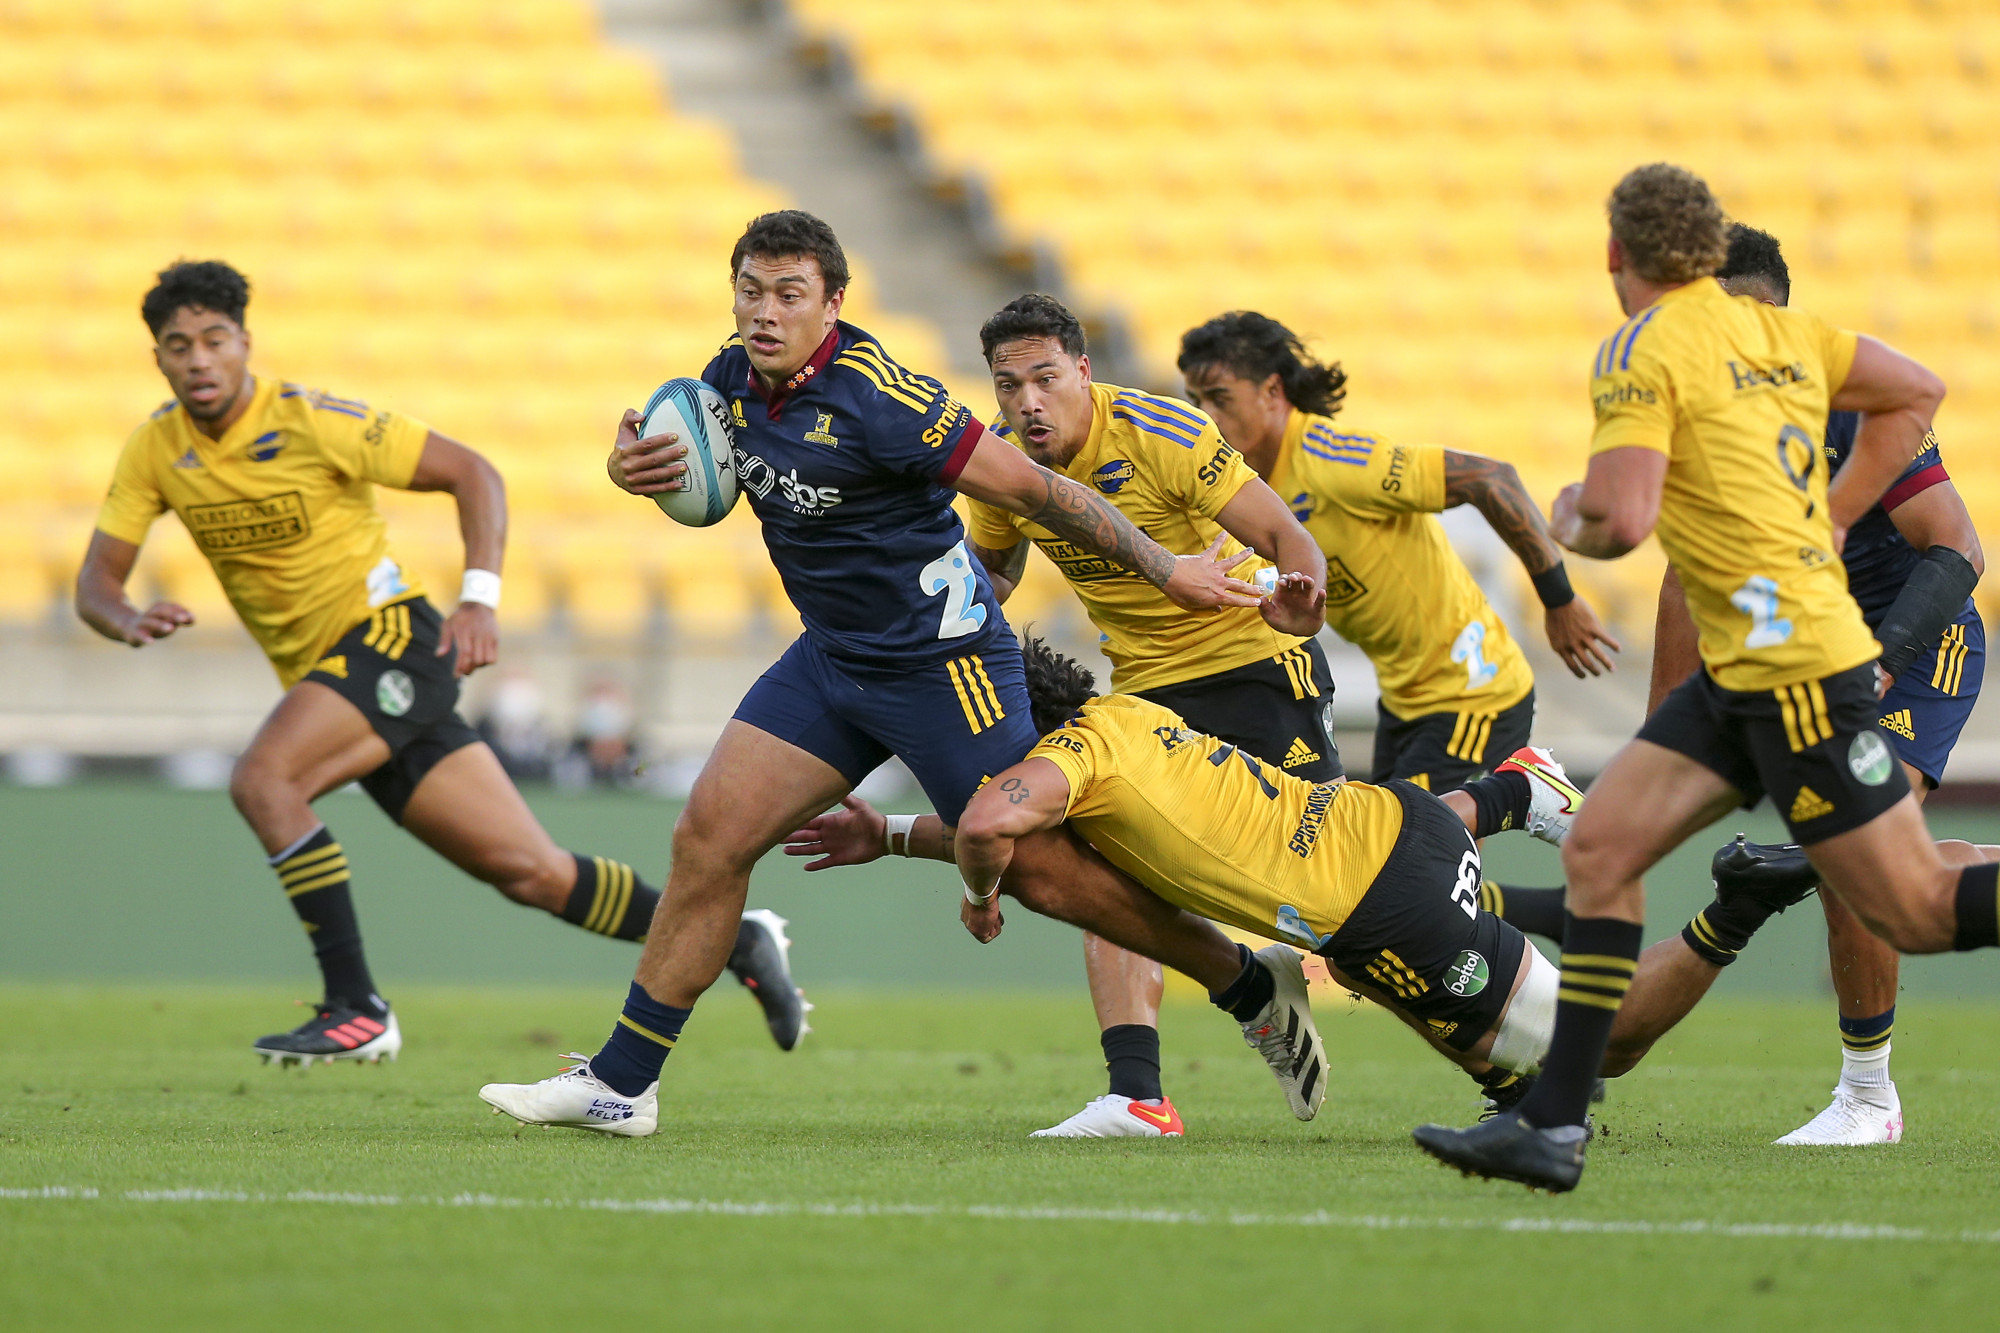 Highlanders named for their final New Zealand Derby match | Highlanders Rugby Club Limited Partnership